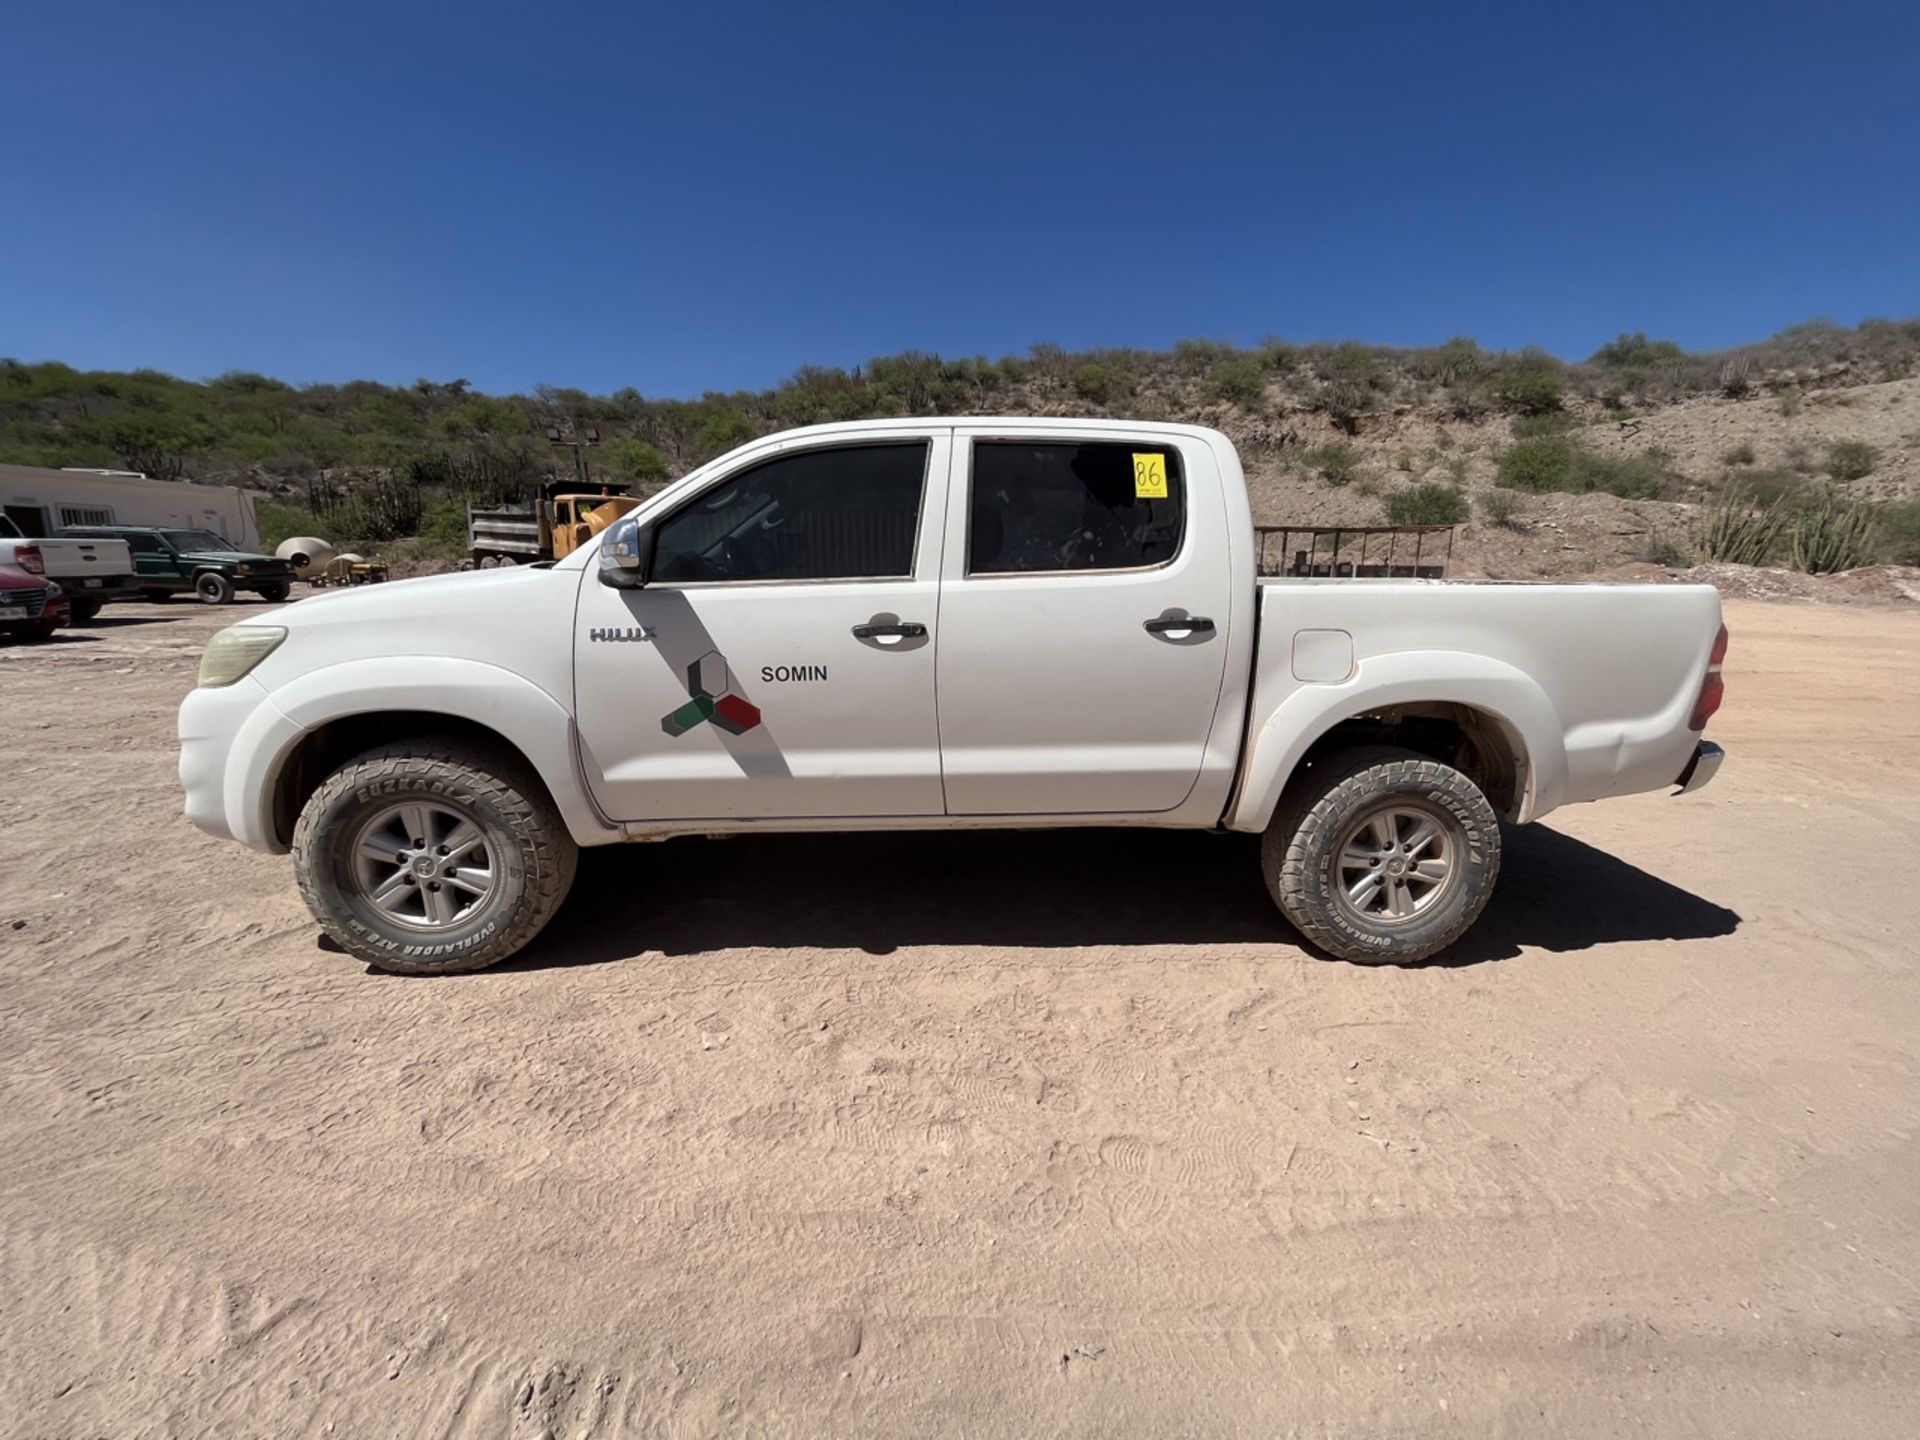 Vehicle Toyota Hilux, Pick Up Double cab white color, Serial MR0EX32G9F0263336, Model 2015, manual - Image 3 of 42